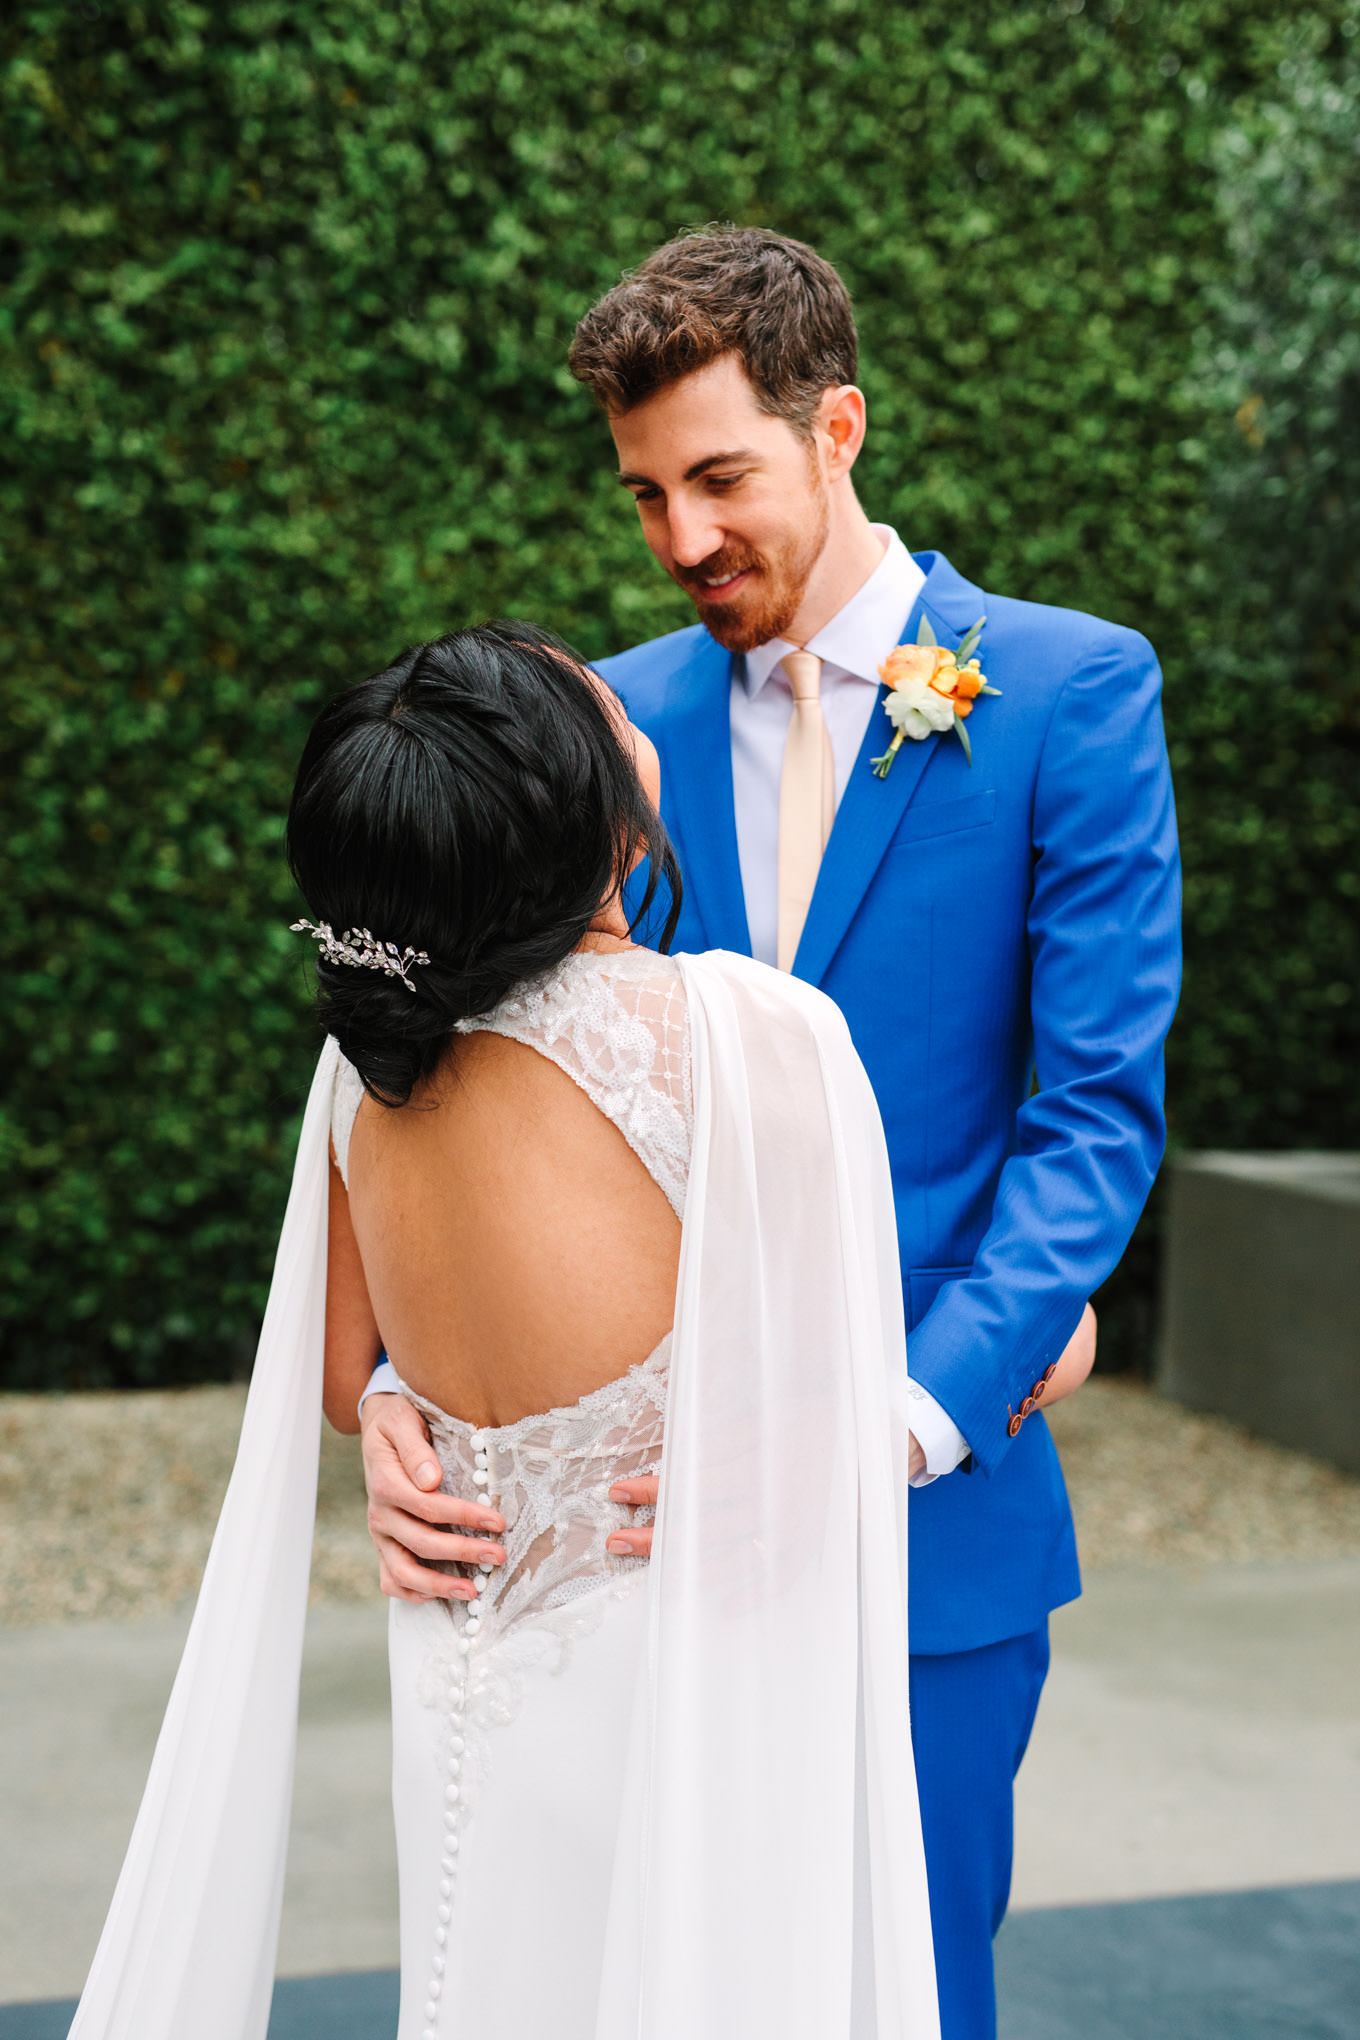 Bride with cape dress and open back | TV inspired wedding at The Fig House Los Angeles | Published on The Knot | Fresh and colorful photography for fun-loving couples in Southern California | #losangeleswedding #TVwedding #colorfulwedding #theknot   Source: Mary Costa Photography | Los Angeles wedding photographer